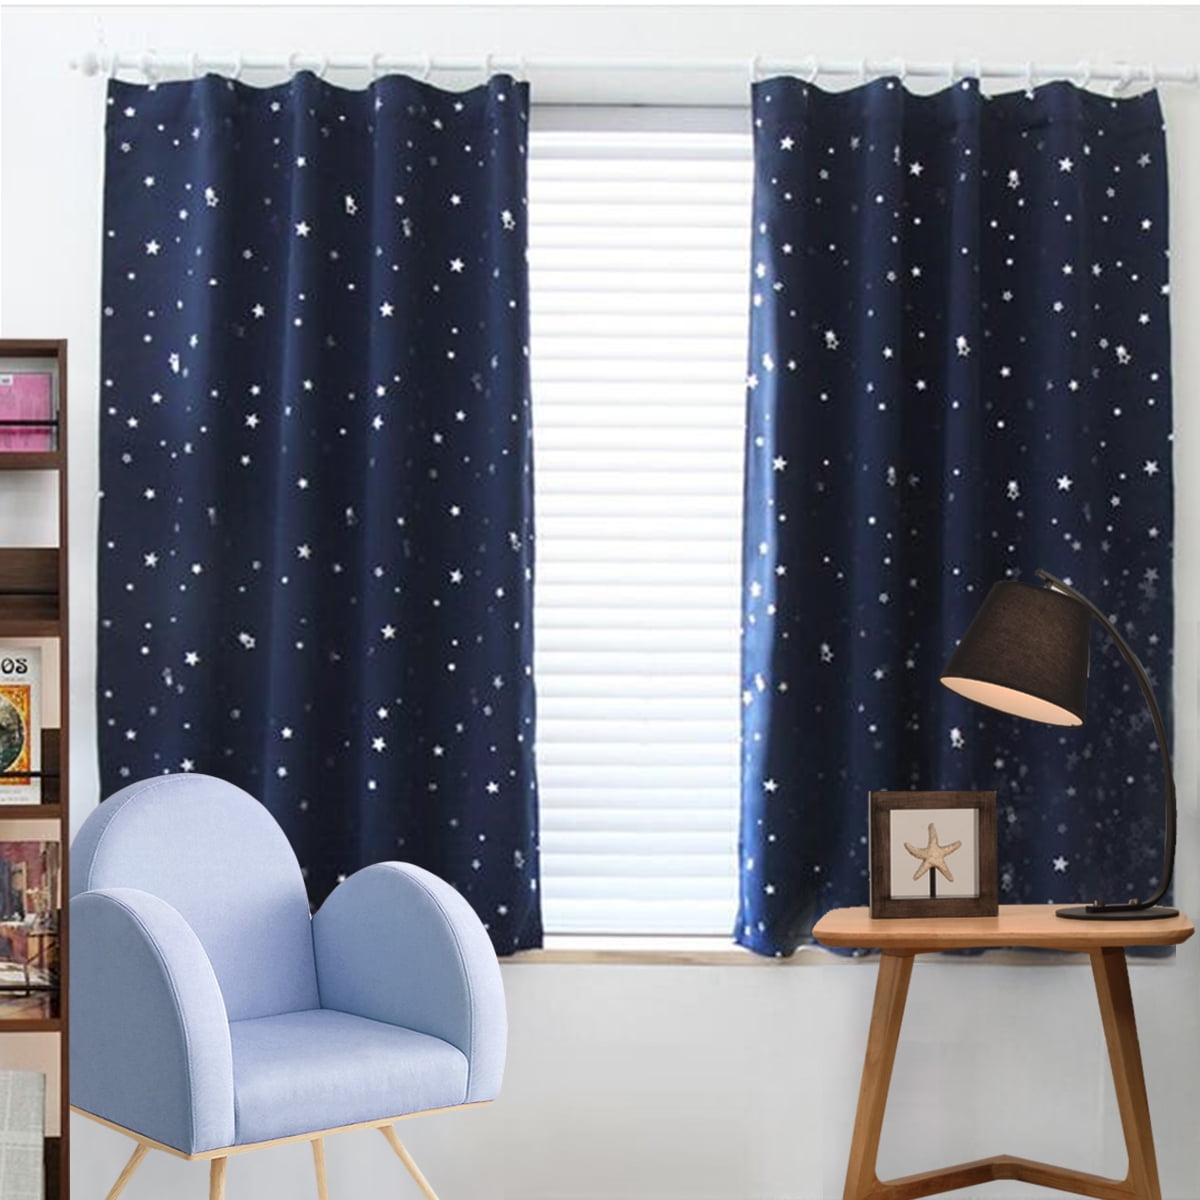 Dimeout Energy Saving Thermal Blackout Curtains Ready Made Eyelet Curtains 